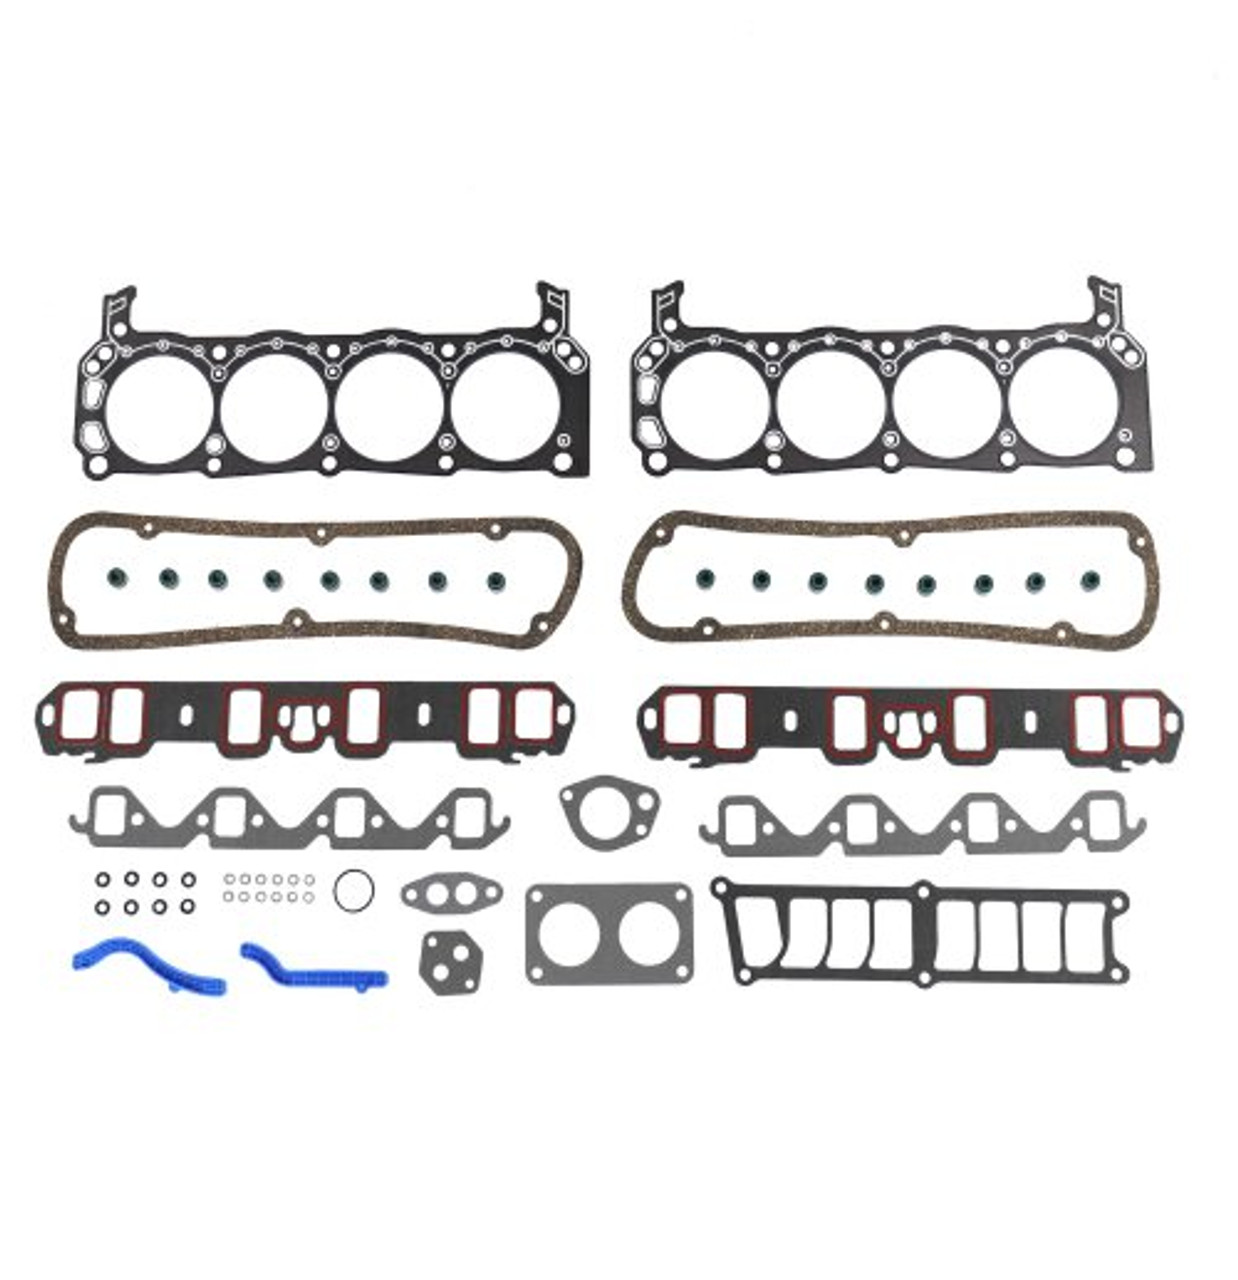 Head Gasket Set with Head Bolt Kit - 1995 Ford F-150 5.0L Engine Parts # HGB4113ZE19